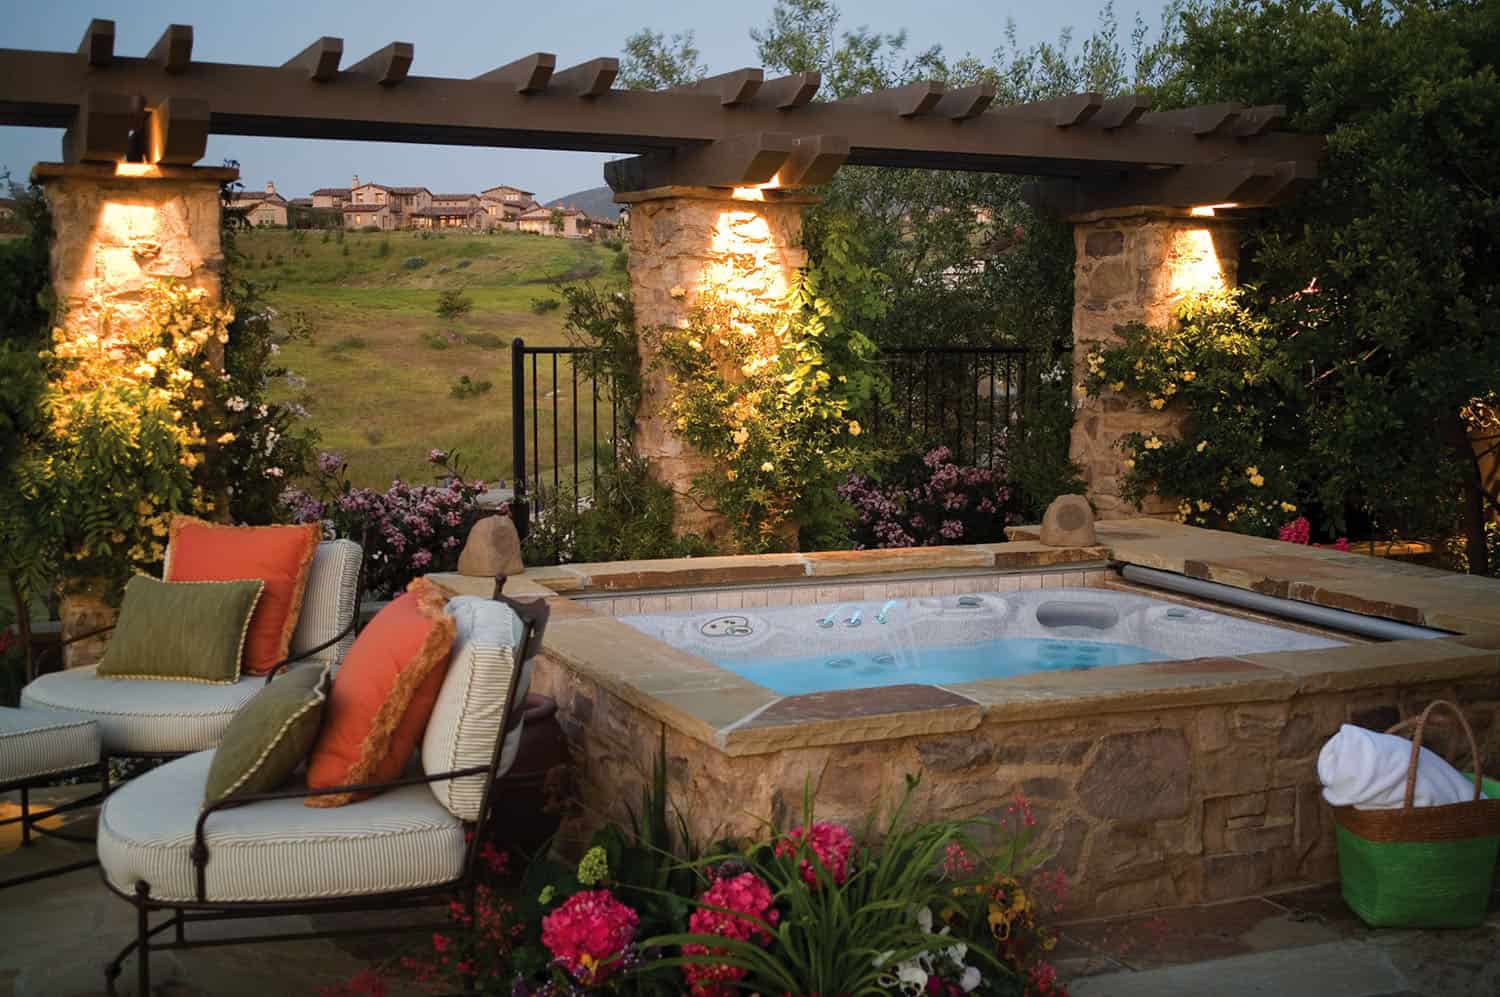 Romantic Hotels in Los Angeles with private Hot Tub ❤️ 2023